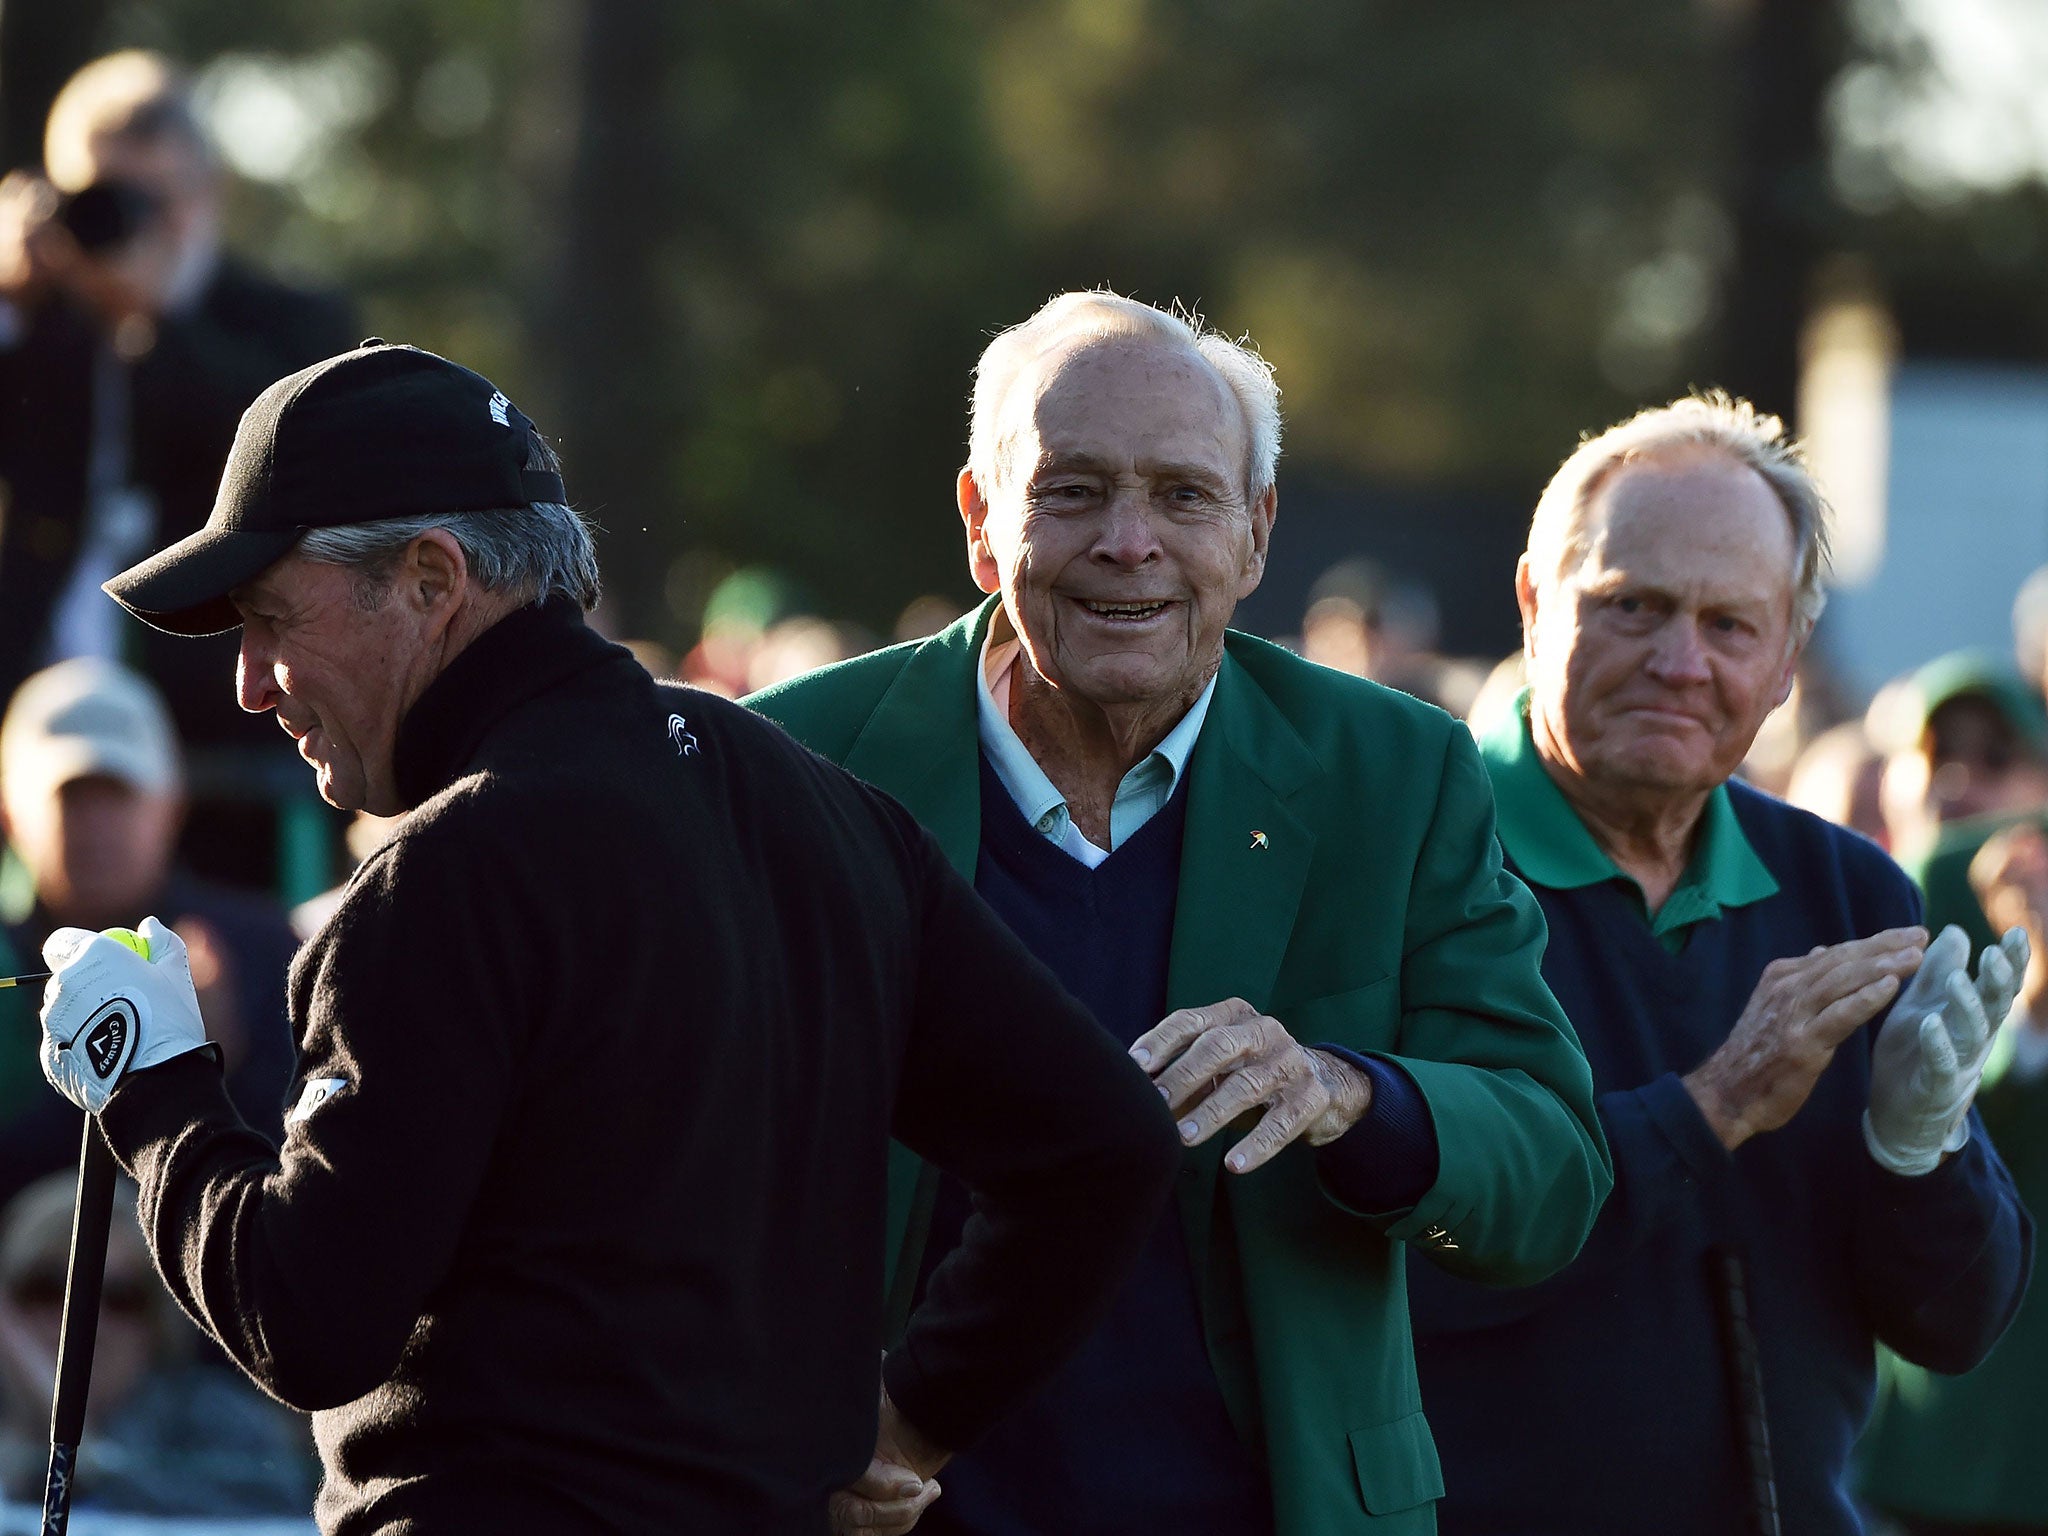 Arnold Palmer with honorary starters Gary Player and Jack Nicklaus at Round 1 of the 80th Masters Golf Tournament earlier this year